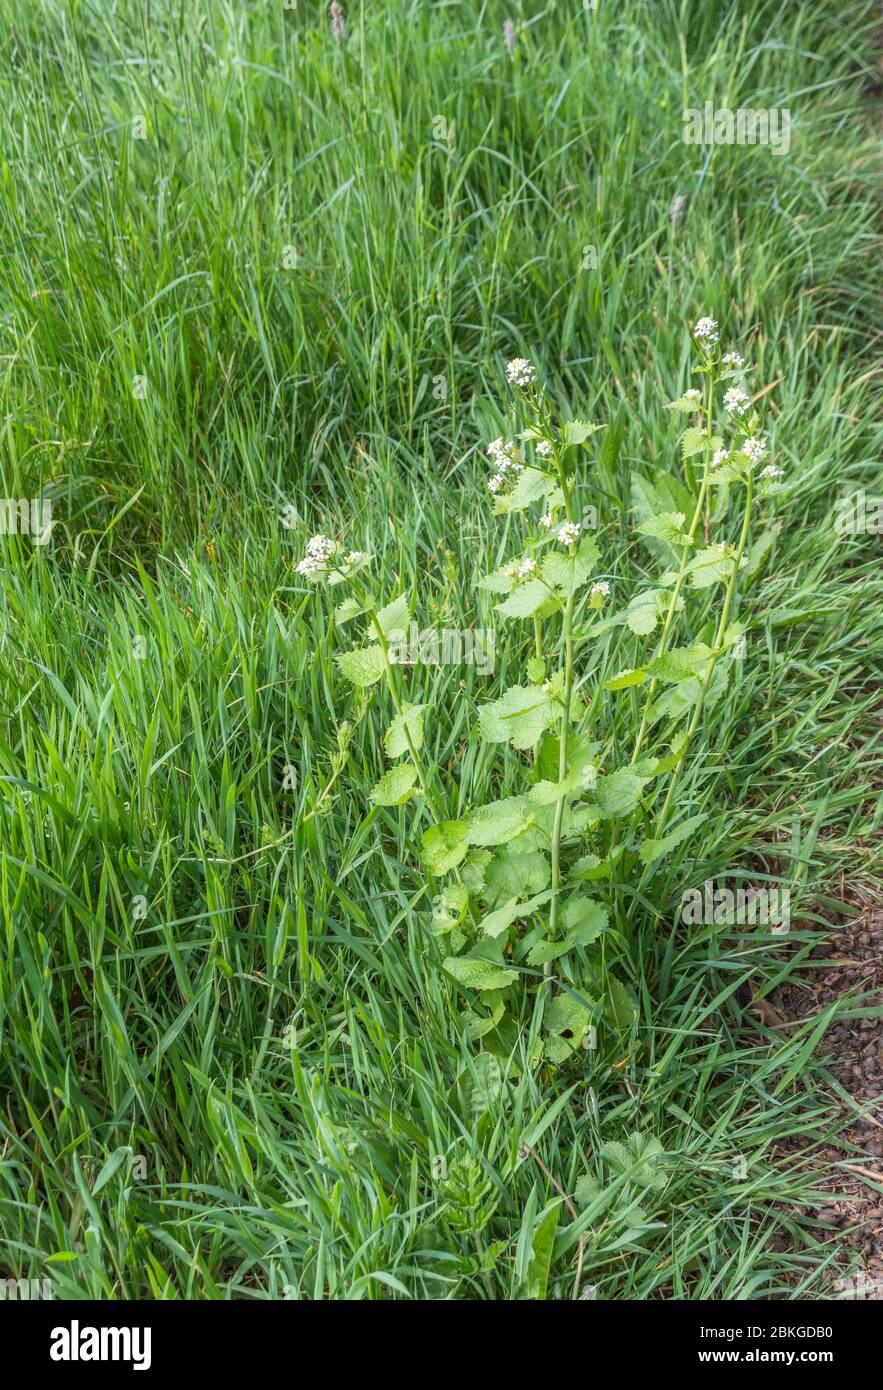 White flowers hedgerow weed Hedge Garlic / Alliaria petiolata growing by roadside. Lvs have garlic flavour, may be eaten, once used in herbal medicine Stock Photo